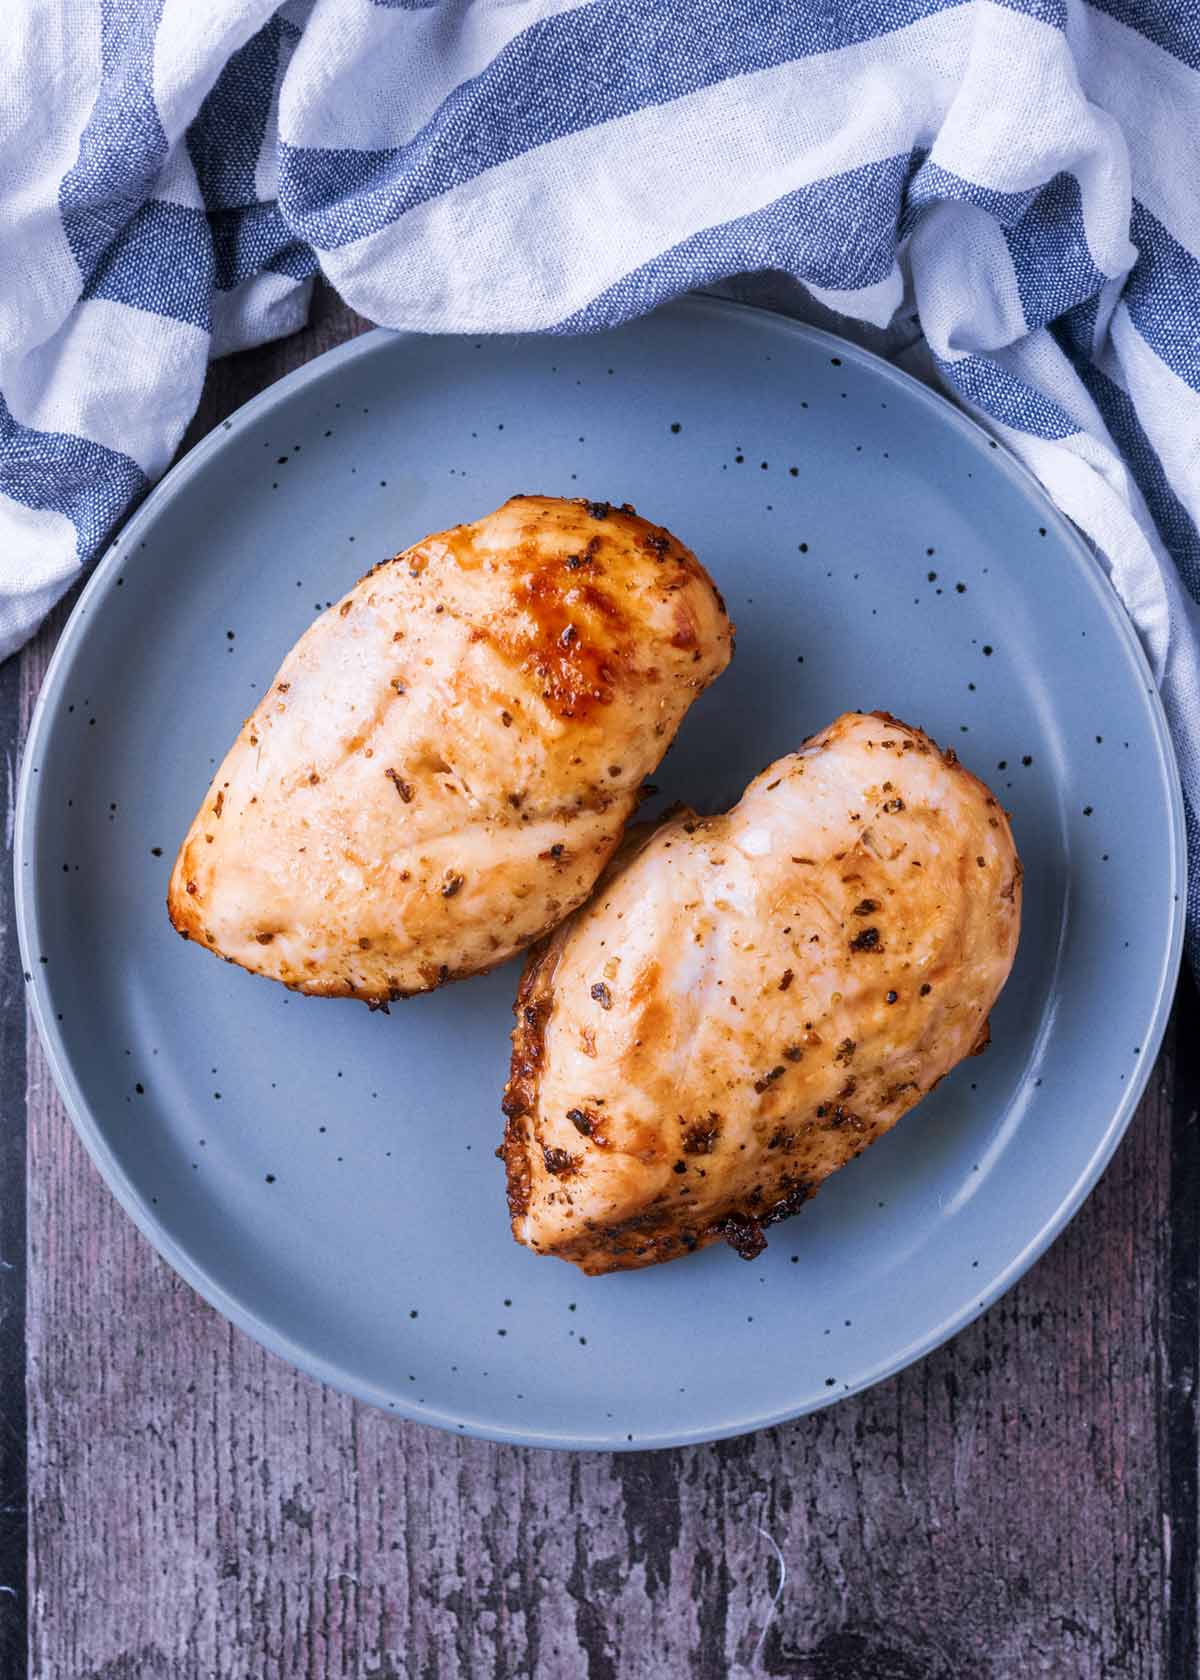 Two cooked chicken breasts on a round grey plate.